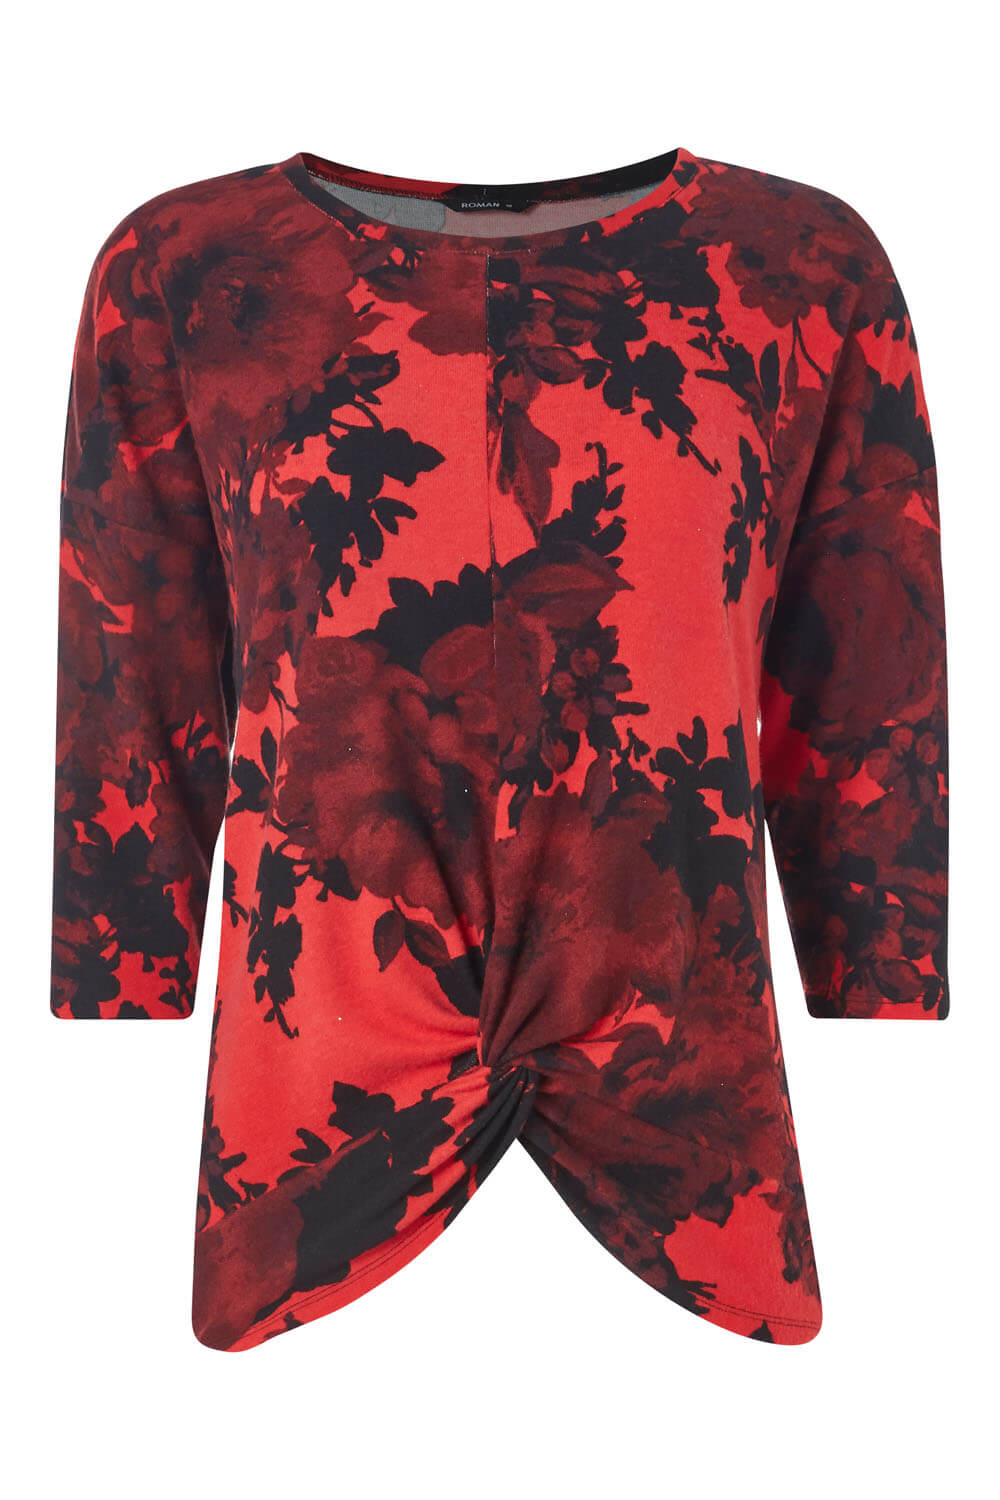 Red Floral Print 3/4 Sleeve Top, Image 5 of 5